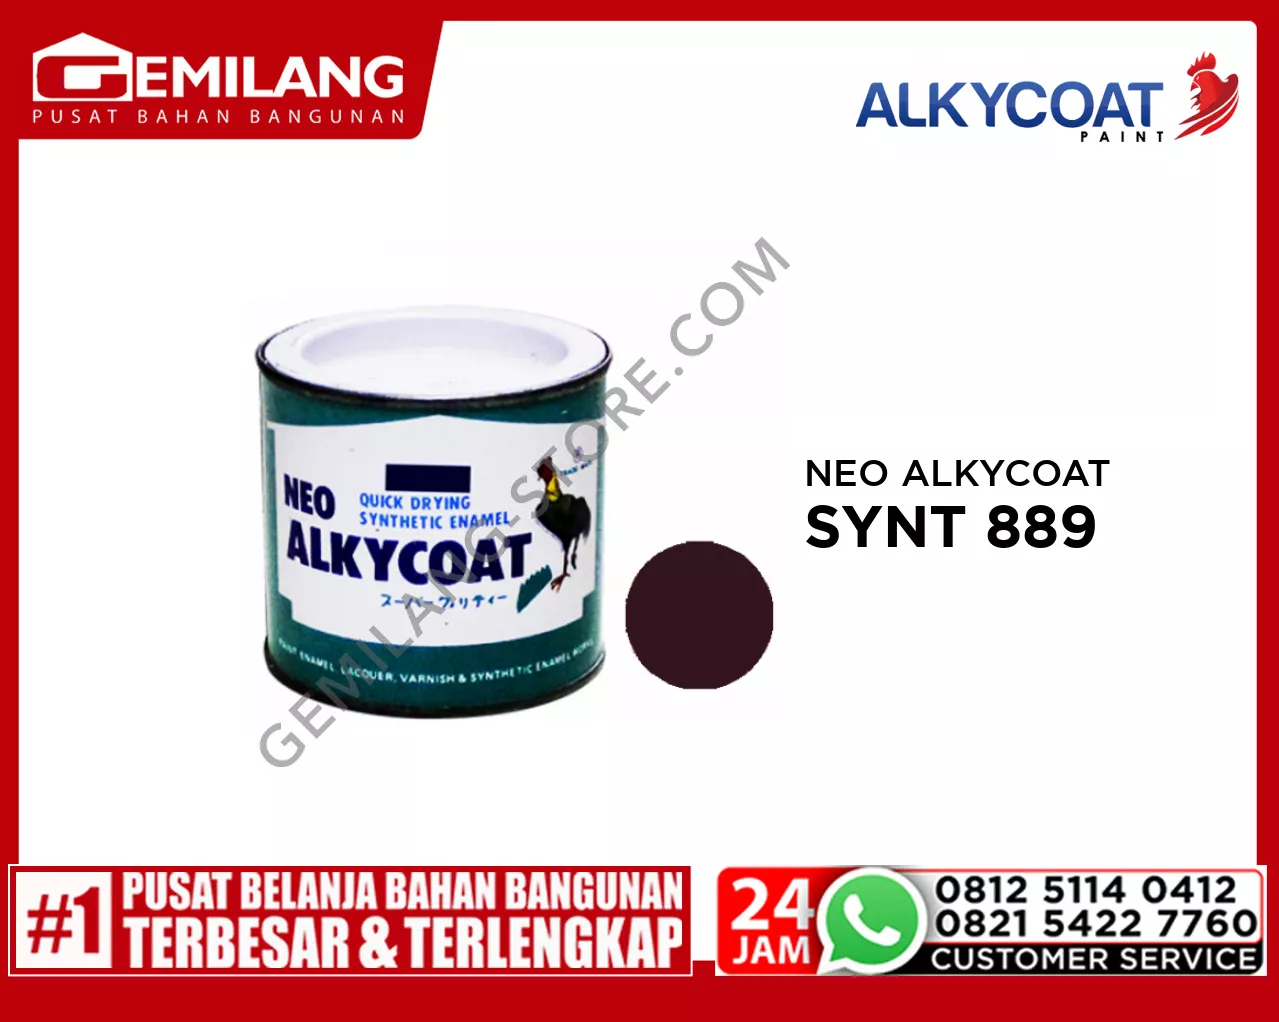 NEO ALKYCOAT SYNT 889 LIVER BROWN 200cc